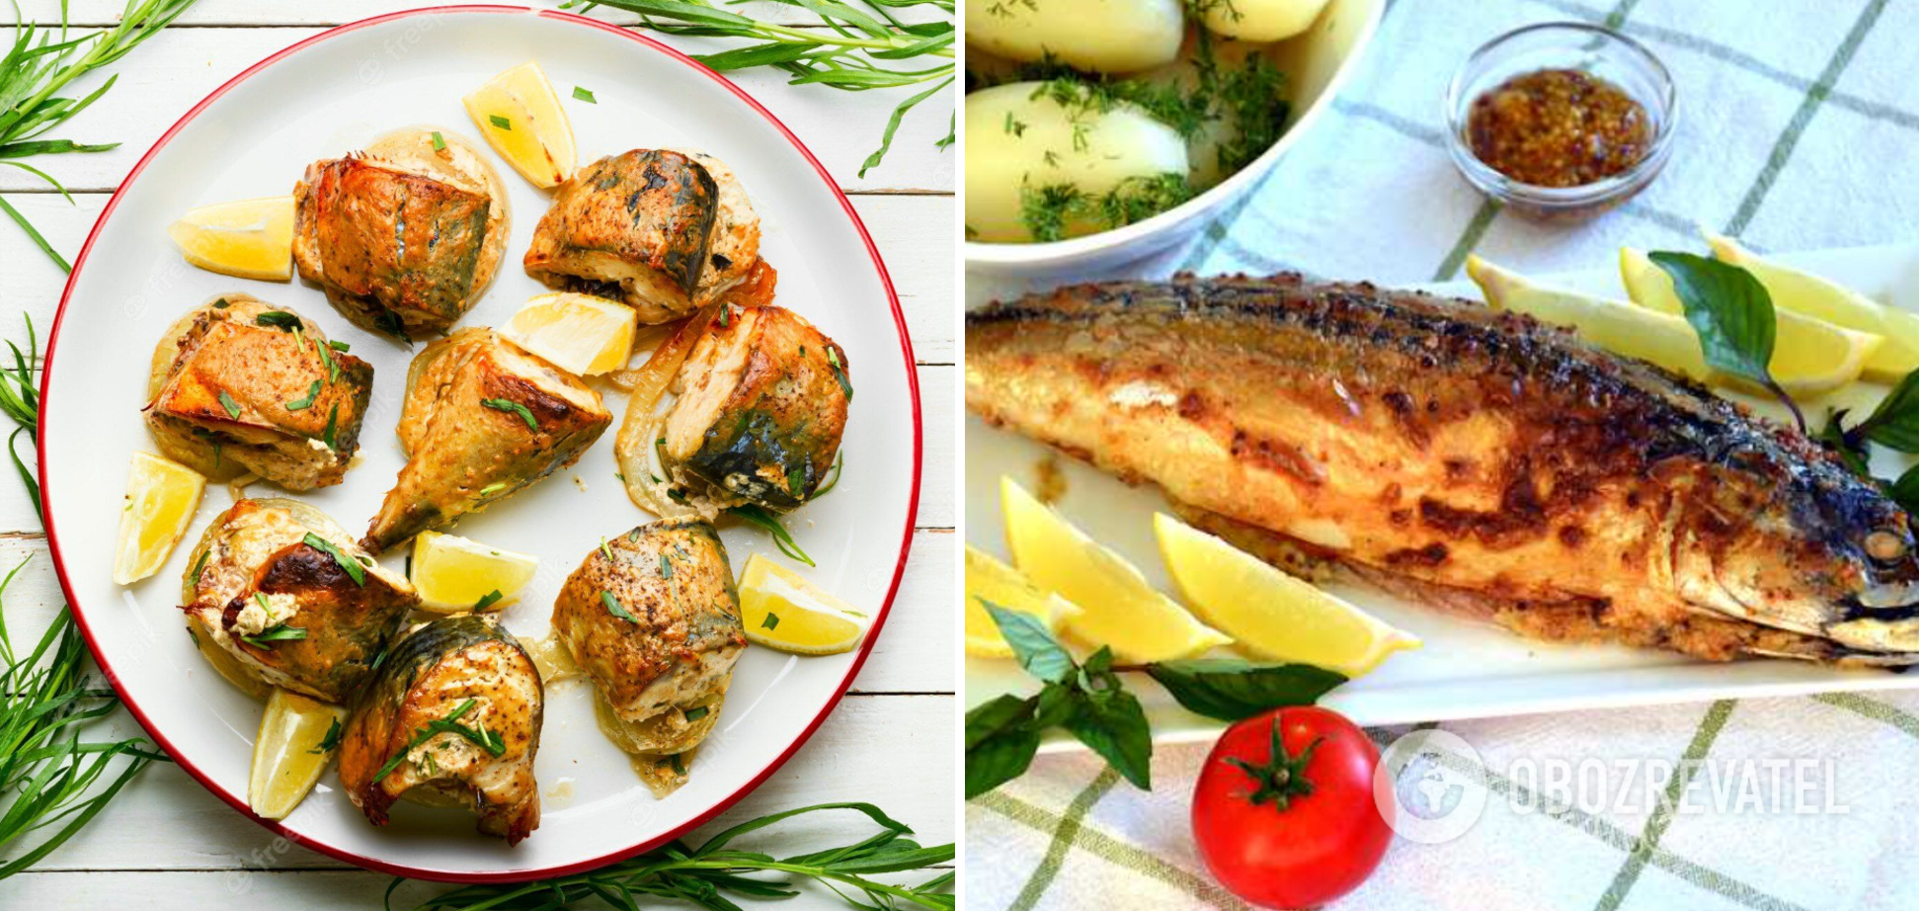 What marinade is delicious to bake mackerel in in the oven